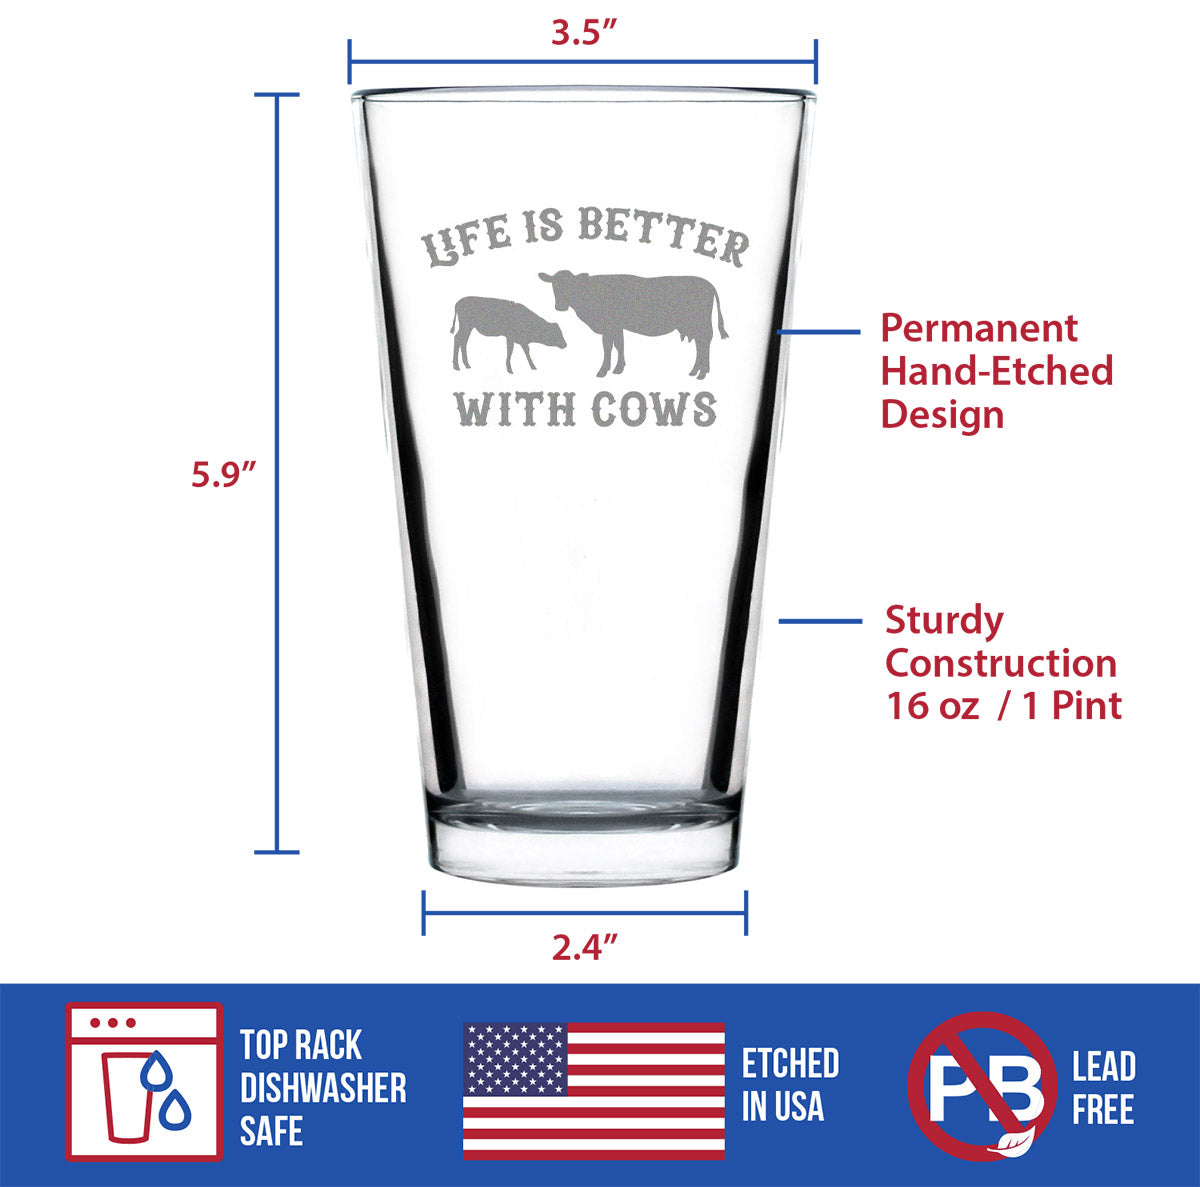 Life Is Better With Cows - Pint Glass for Beer - Funny Cow Gifts and Decor for Men &amp; Women - 16 Oz Glasses